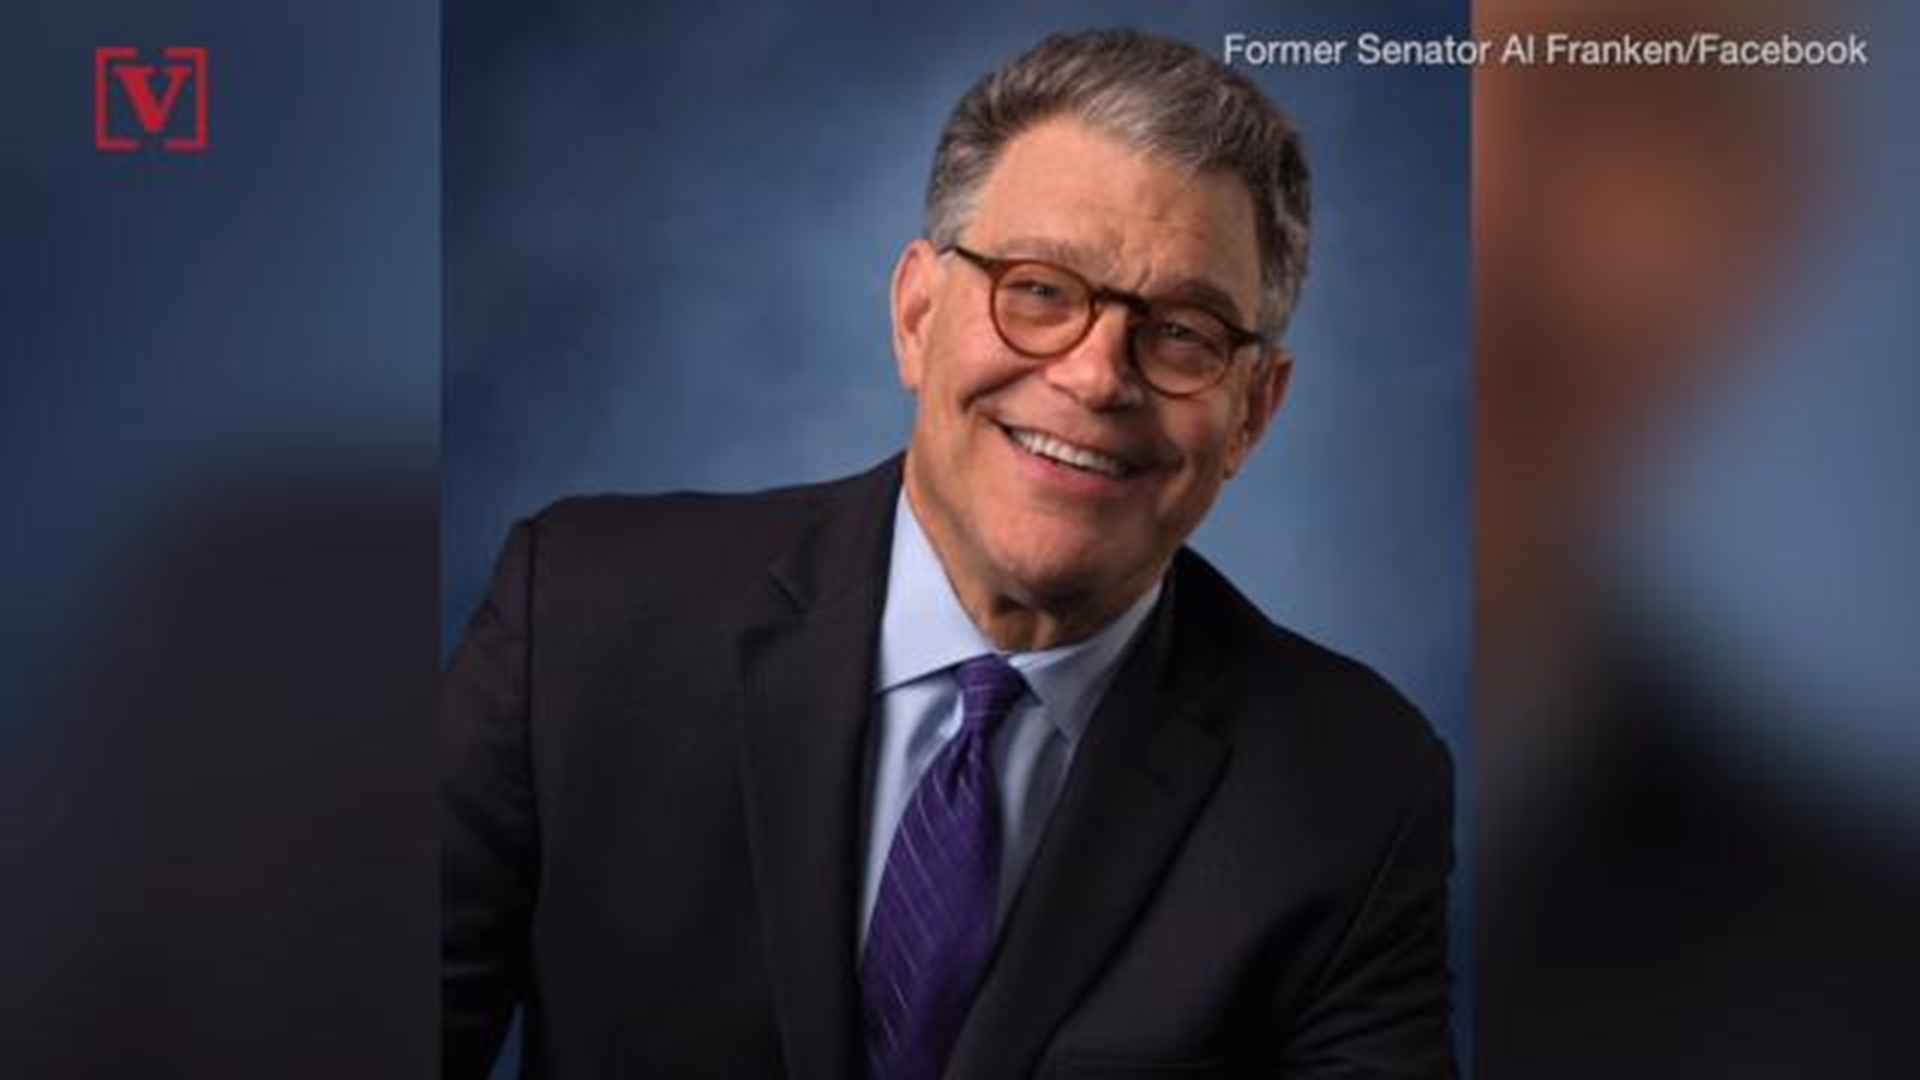 According to Newsweek, Minnesota Senator, Amy Klobuchar, says that former Senator Al Franken has had two acts and is still going to have a third.  Veuer's Chandra Lanier has the story